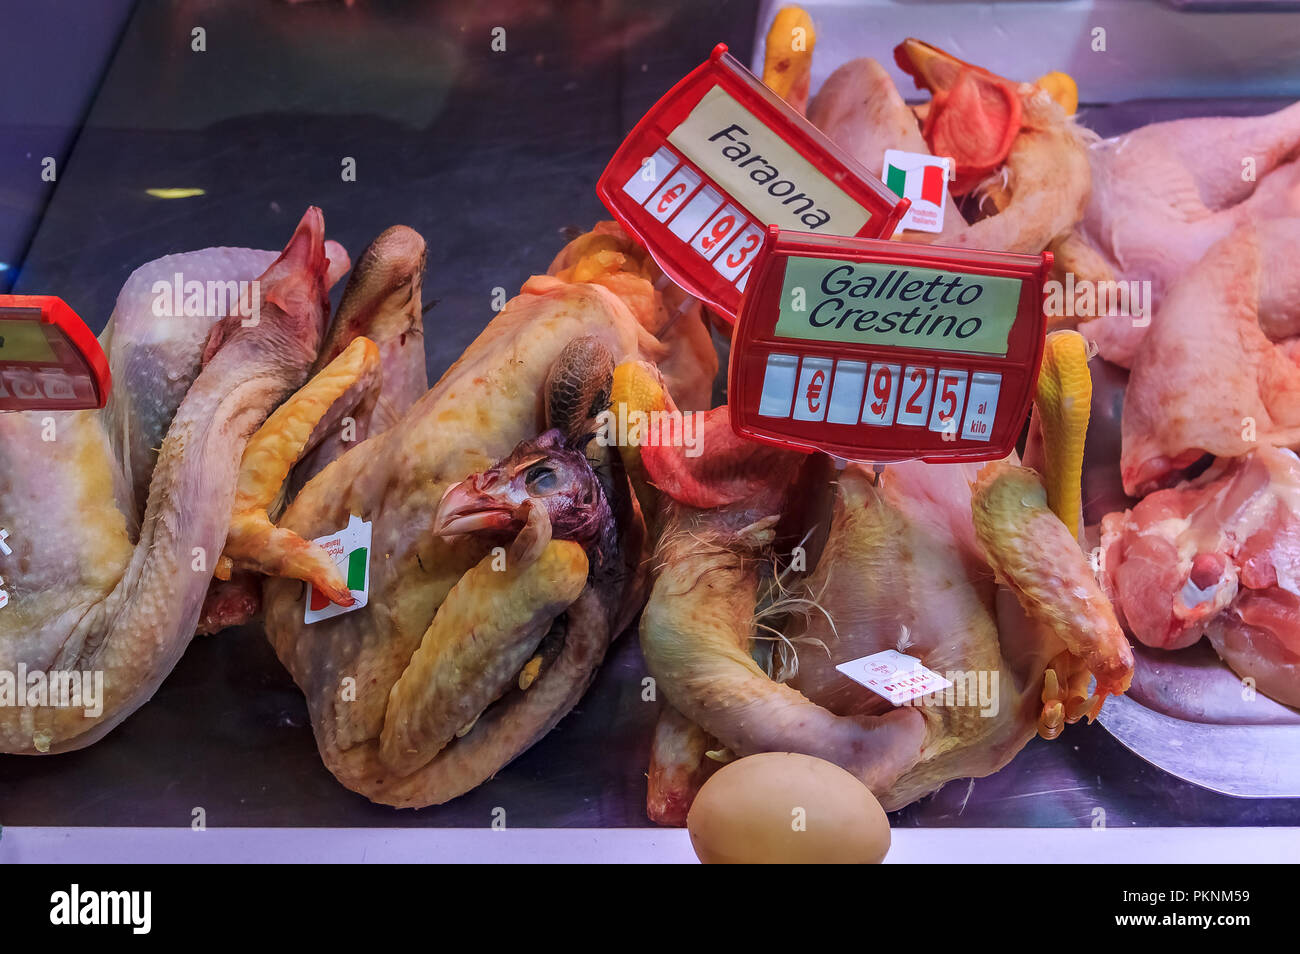 Plucked chickens for sale at the market in Ventimiglia, Liguria region of Italy Stock Photo